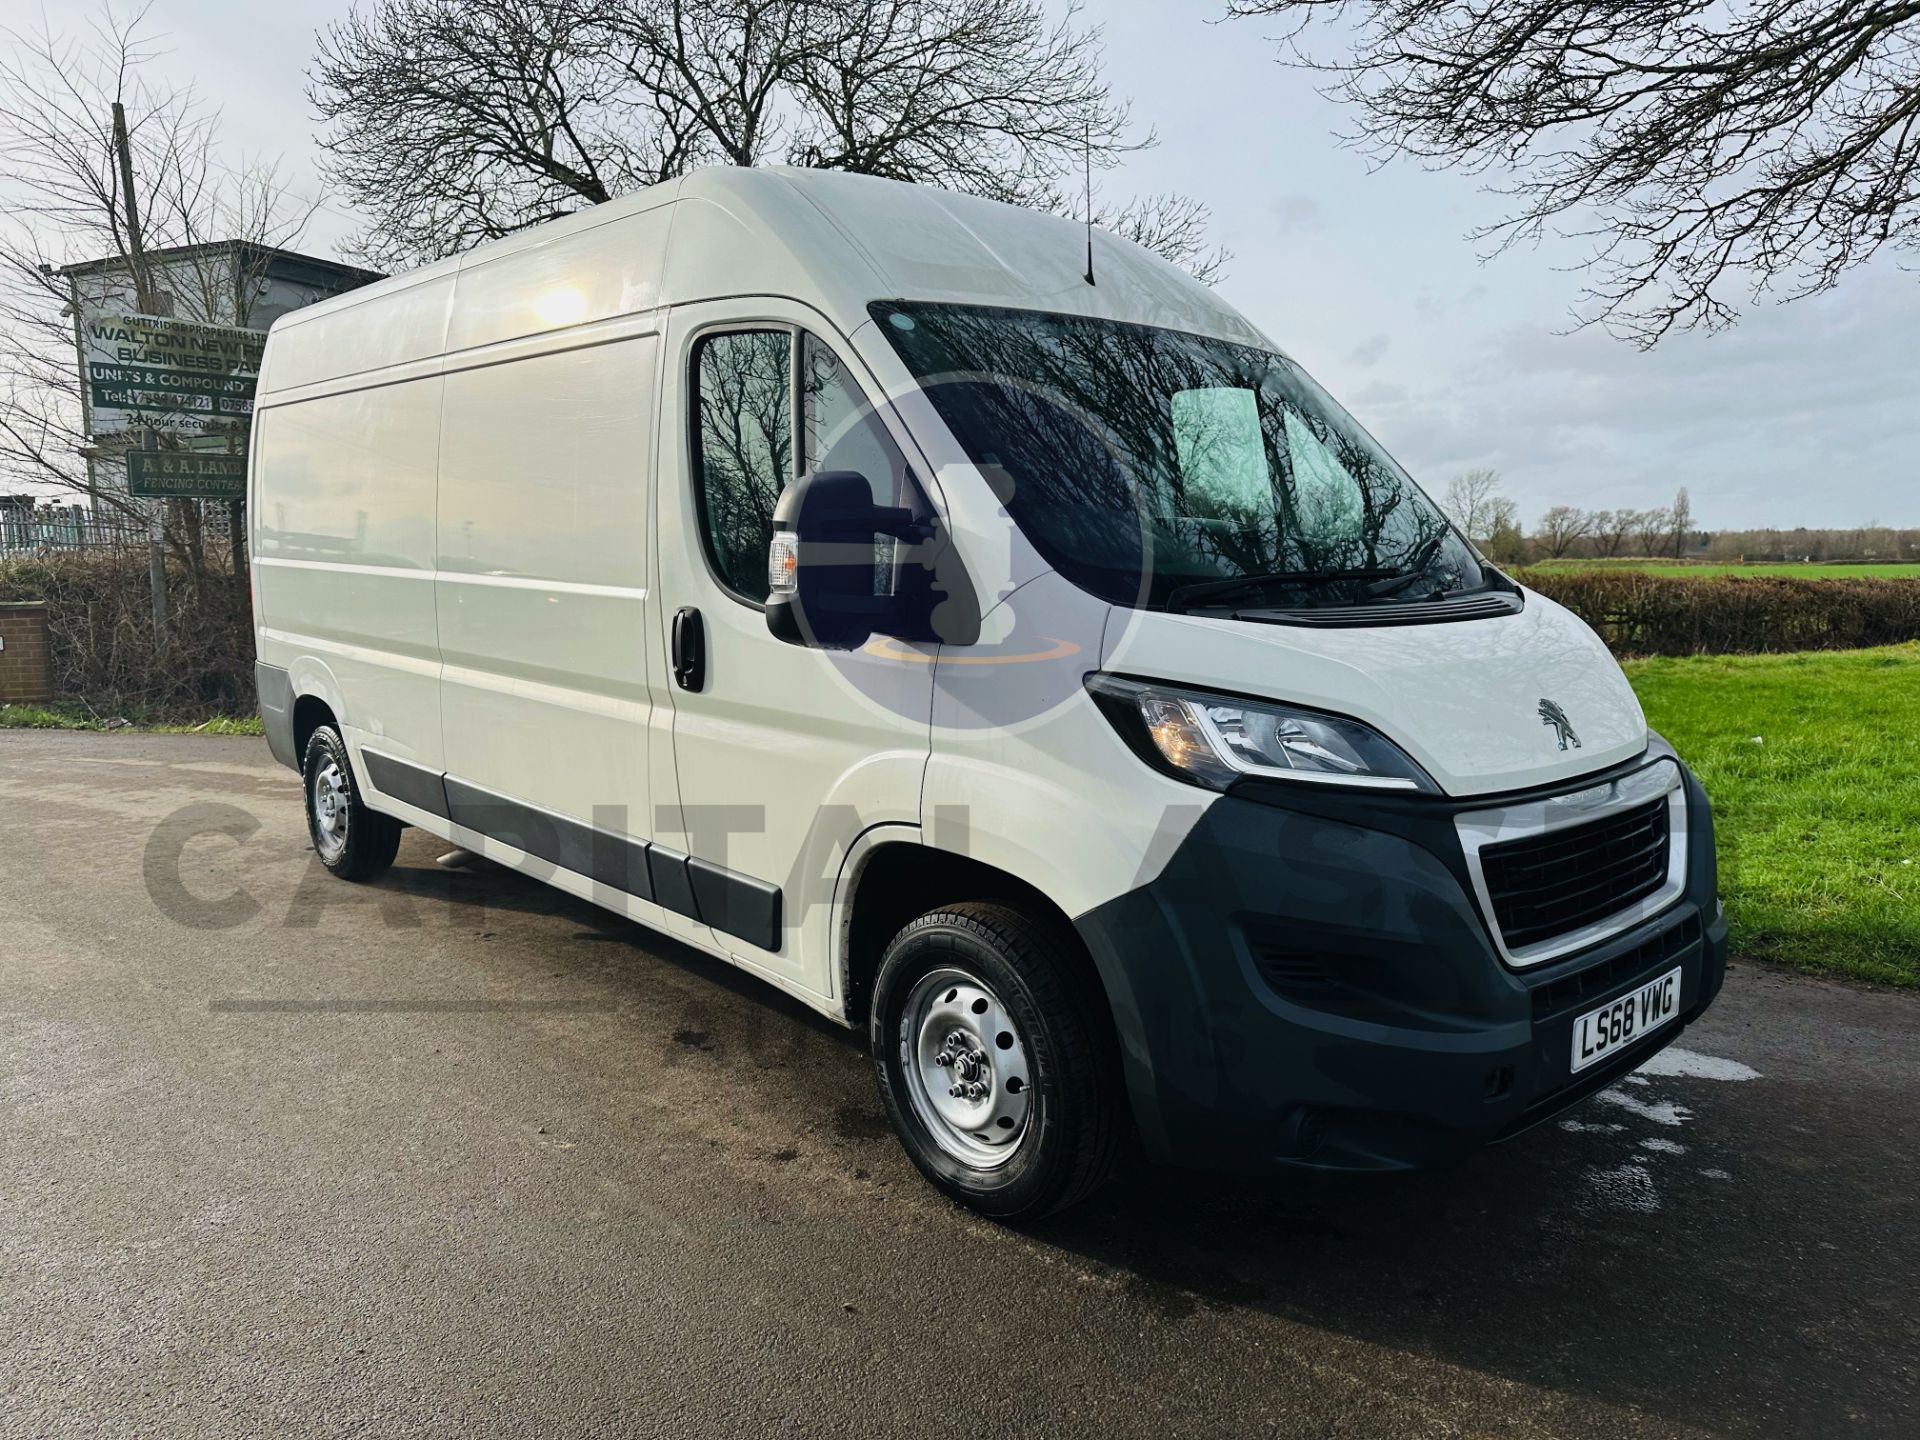 PEUGEOT BOXER *PROFESSIONAL* LWB HI-ROOF (2019 - EURO 6) 2.2 BLUE HDI - 6 SPEED *A/C* (1 OWNER) - Image 2 of 28